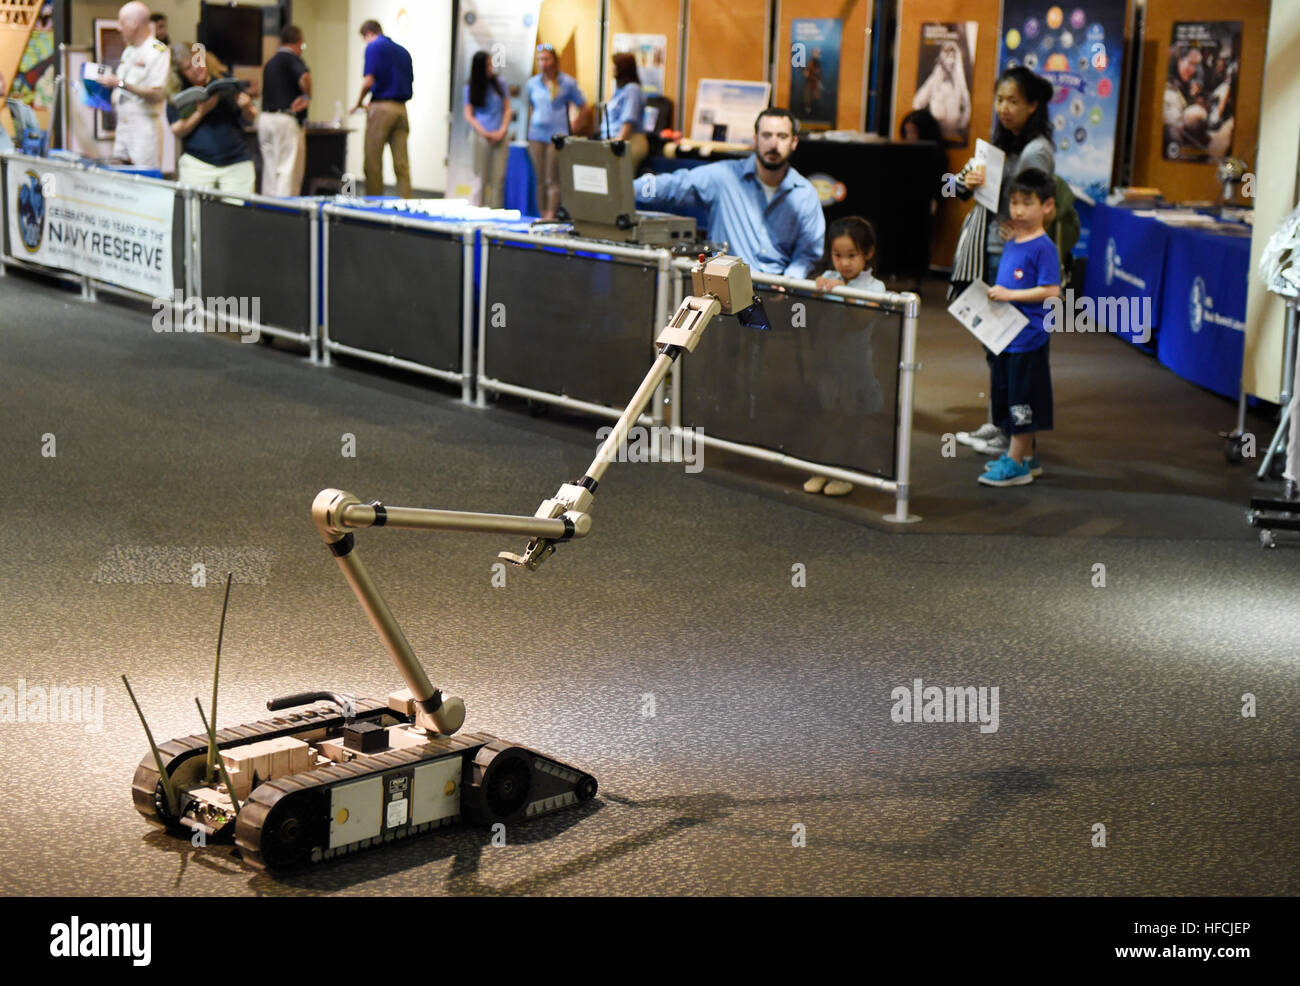 150522-N-PO203-068 NEW YORK  (May 22, 2015) Aaron O'Toole, a robotics engineer at the Naval Surface Warfare Center Indian Head, demonstrates an Explosive Ordnance Disposal (EOD) PackBot at the New York Hall of Science in Queens, N.Y., as part of the Office of Naval Research (ONR) / U.S. Naval Research Laboratory (NRL) student outreach during Fleet Week New York (FWNY). (U.S. Navy photo by John F. Williams/Released) ONR at FWNY 150522-N-PO203-068 Stock Photo